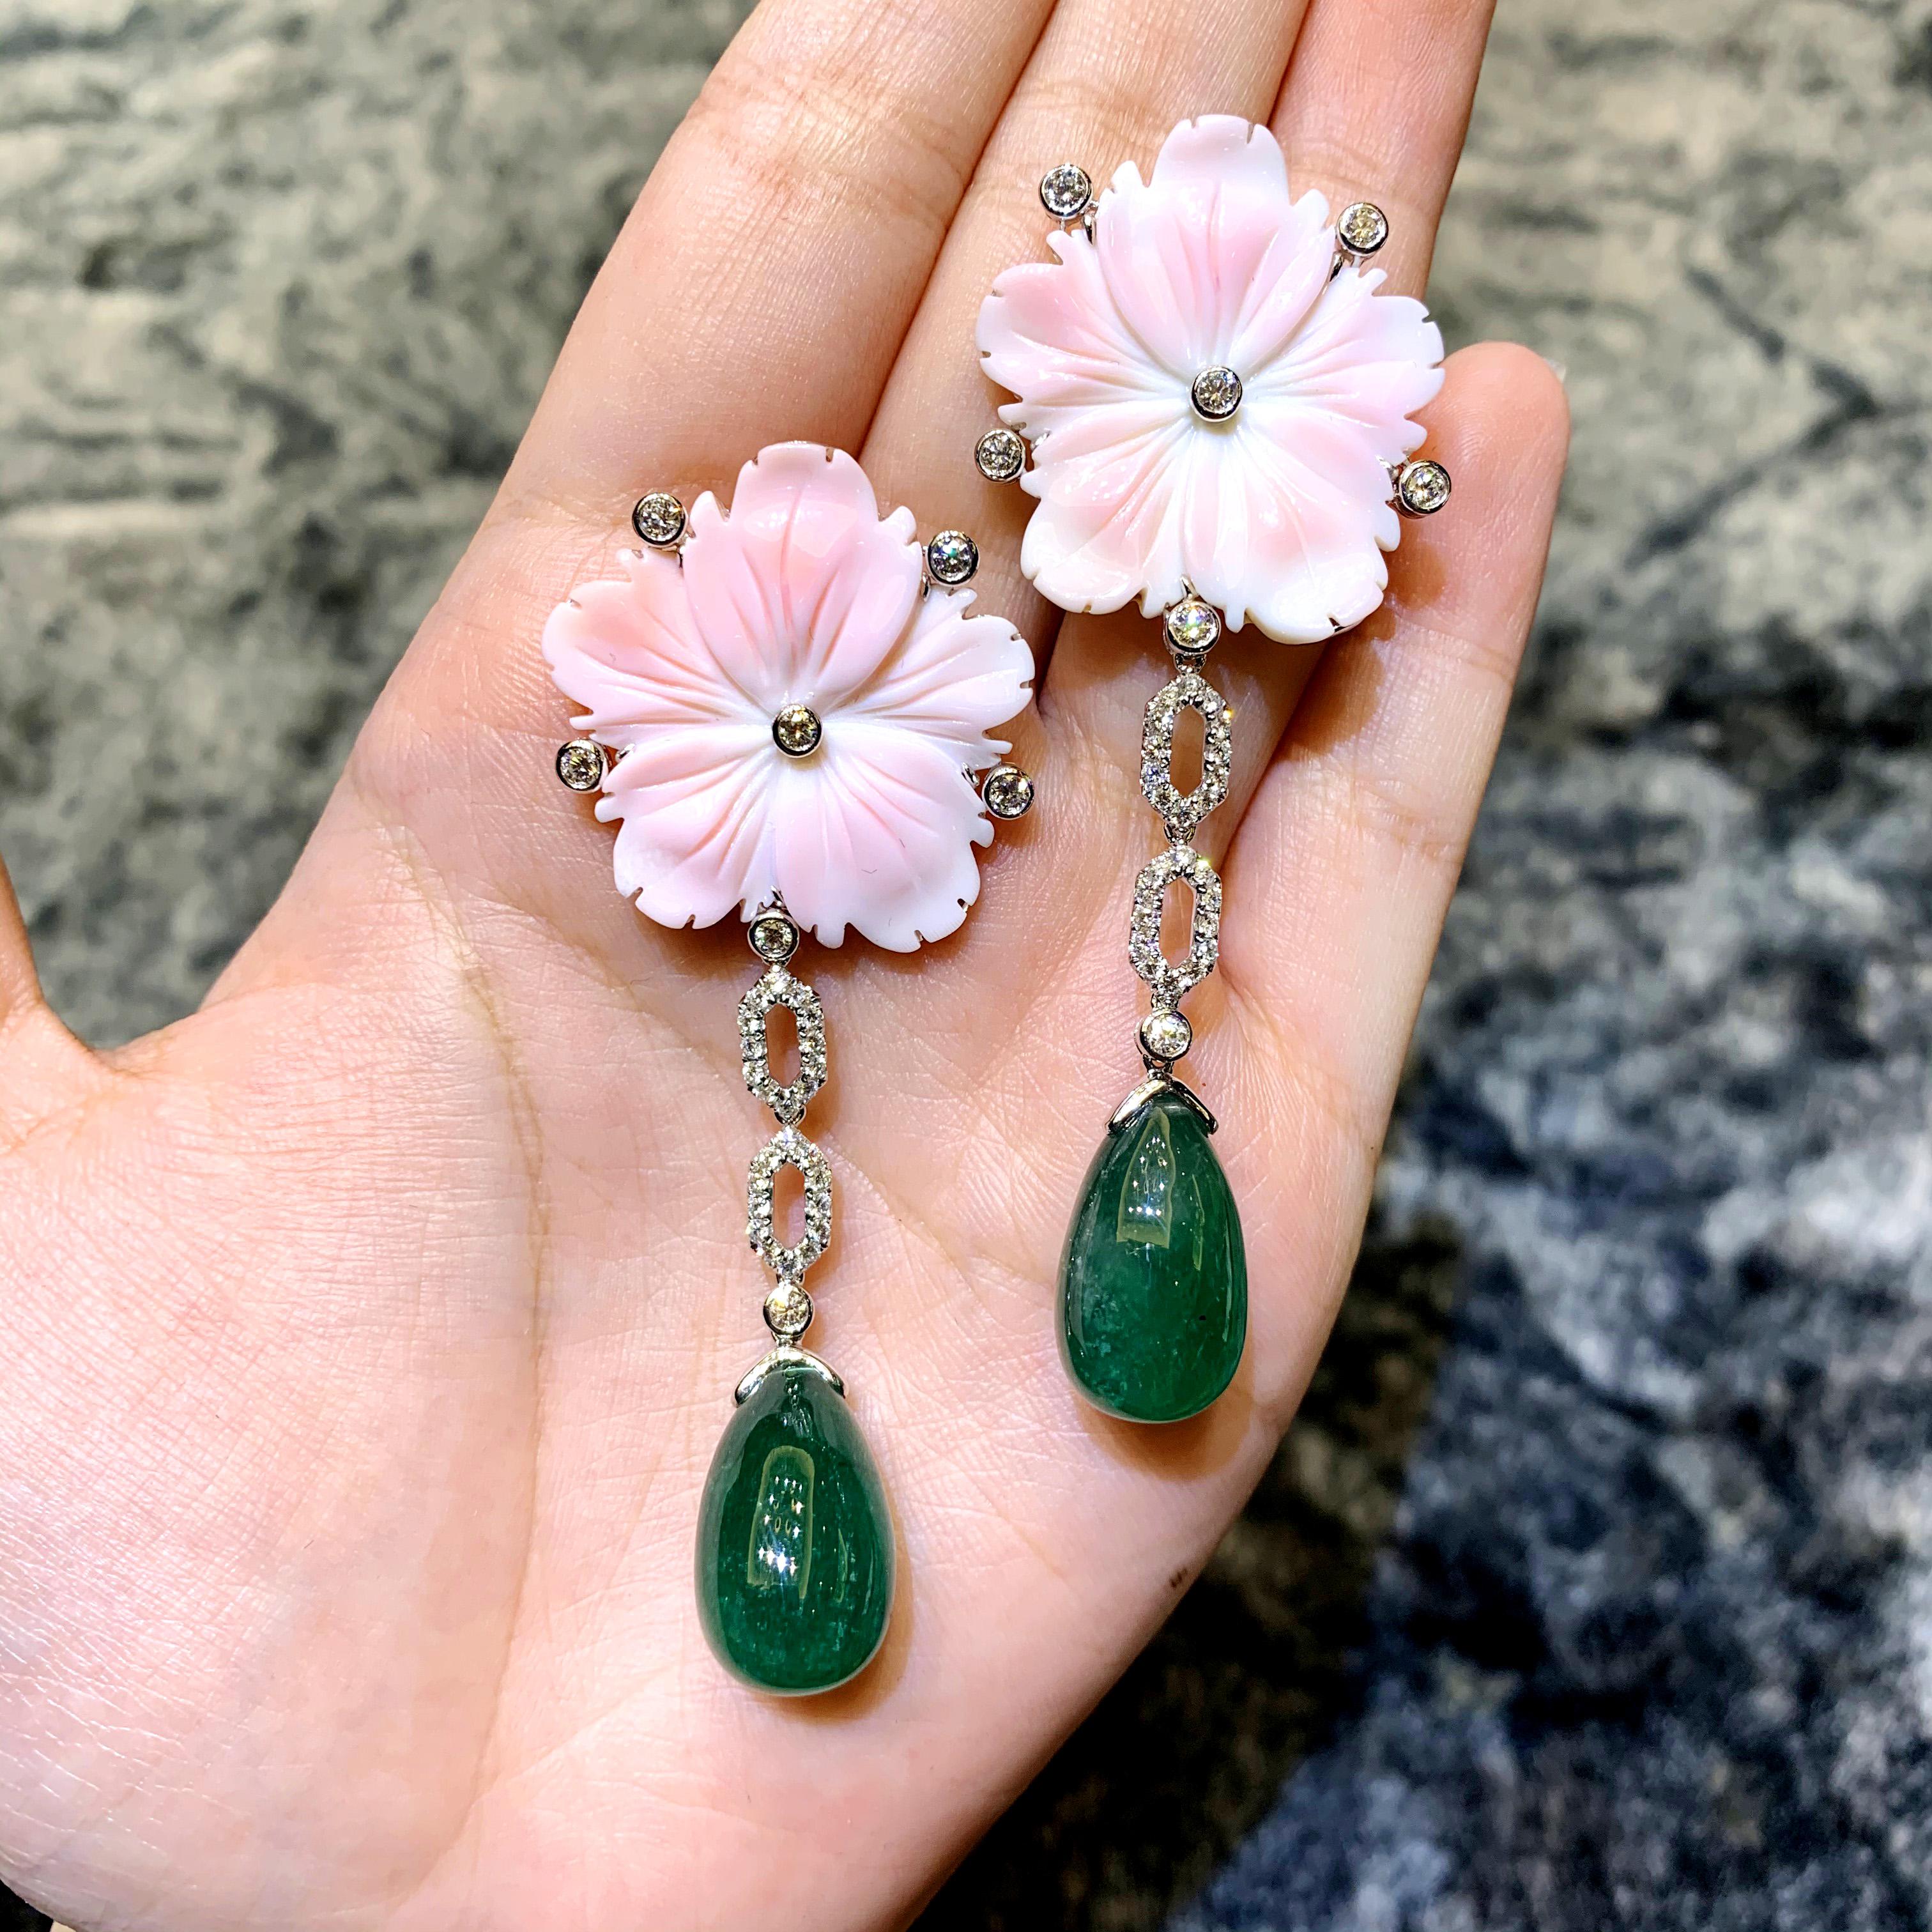 A beautiful pair of 36.85 carat of Zambian Emerald is set with pink carved shell. A great addition to your cocktail jewelry collection. The shell are carved by hand and the emerald is picked out of an old jewelry. 